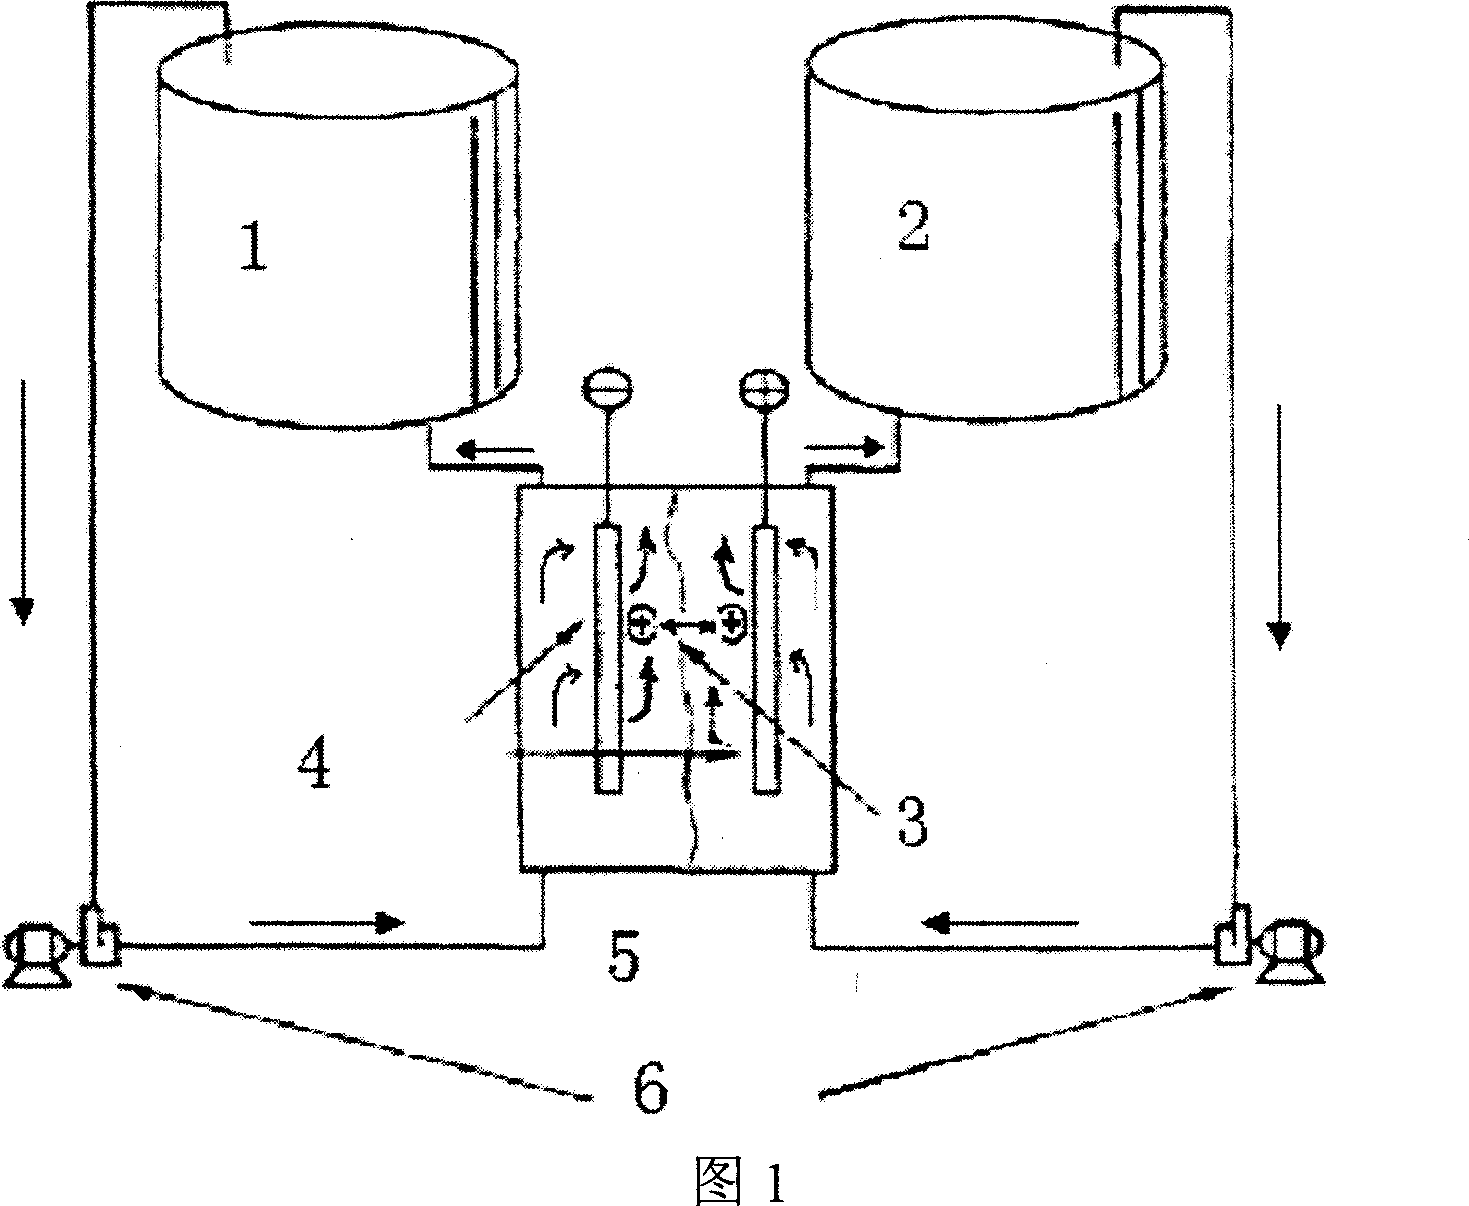 Iron composite/halogen electrochemical system for flow electric storage